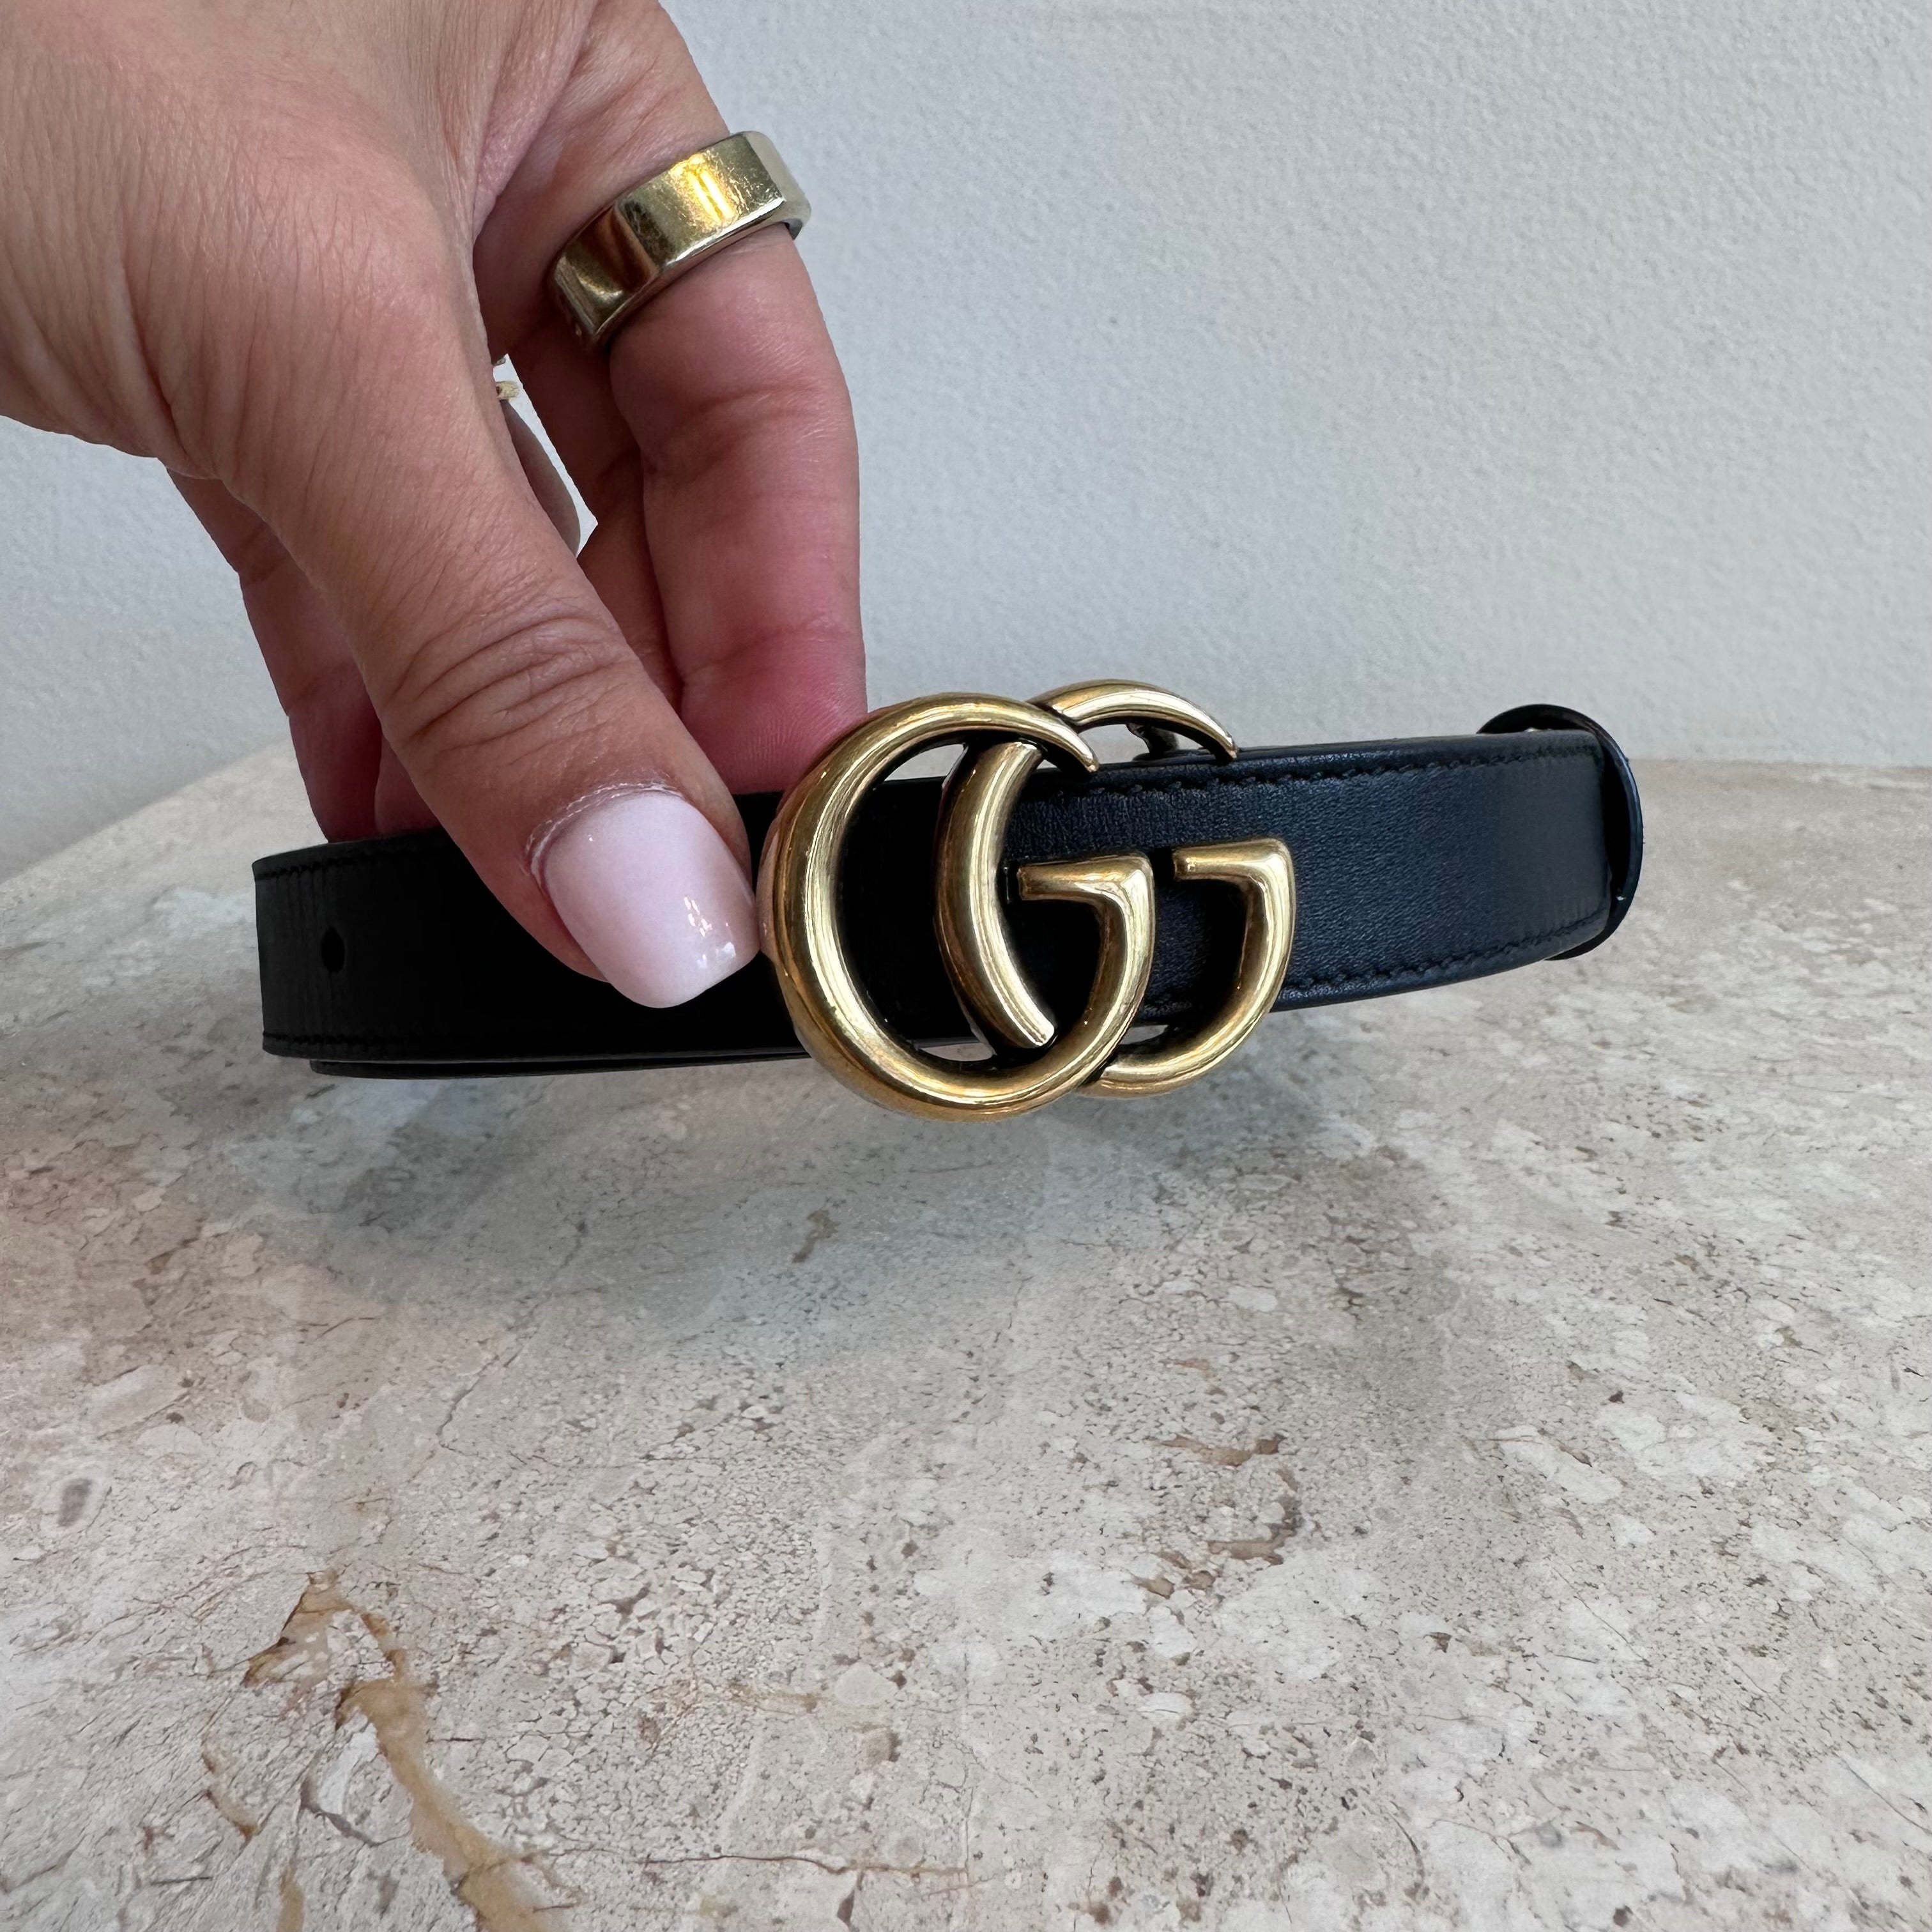 Pre-Owned GUCCI Women's Slim Black Leather Belt with Mini Double G Buckle - Size 32/80